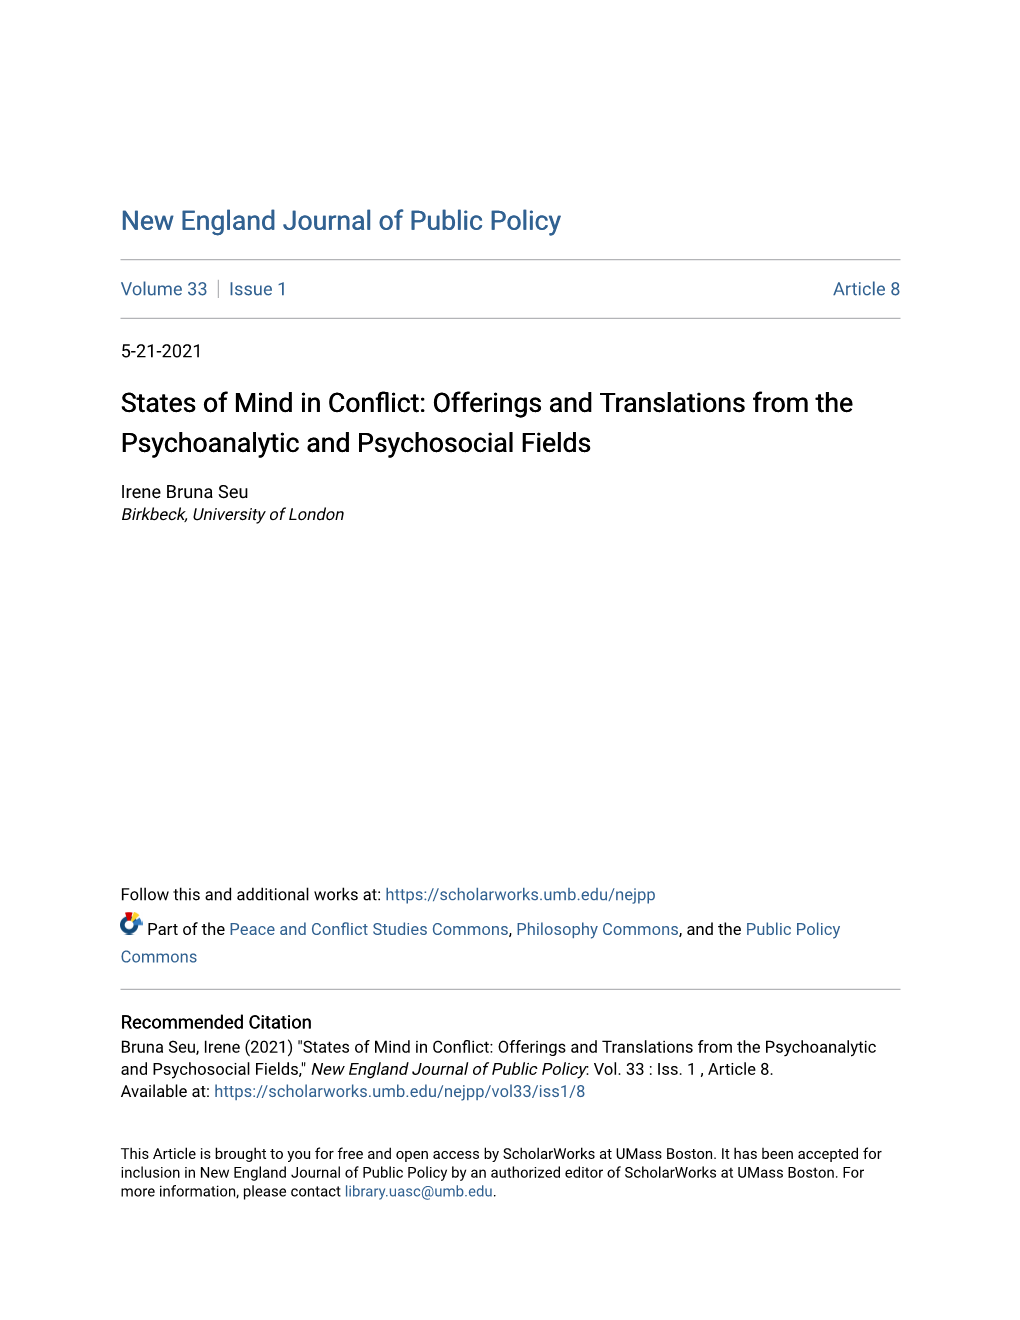 States of Mind in Conflict: Offerings and Translations from the Psychoanalytic and Psychosocial Fields